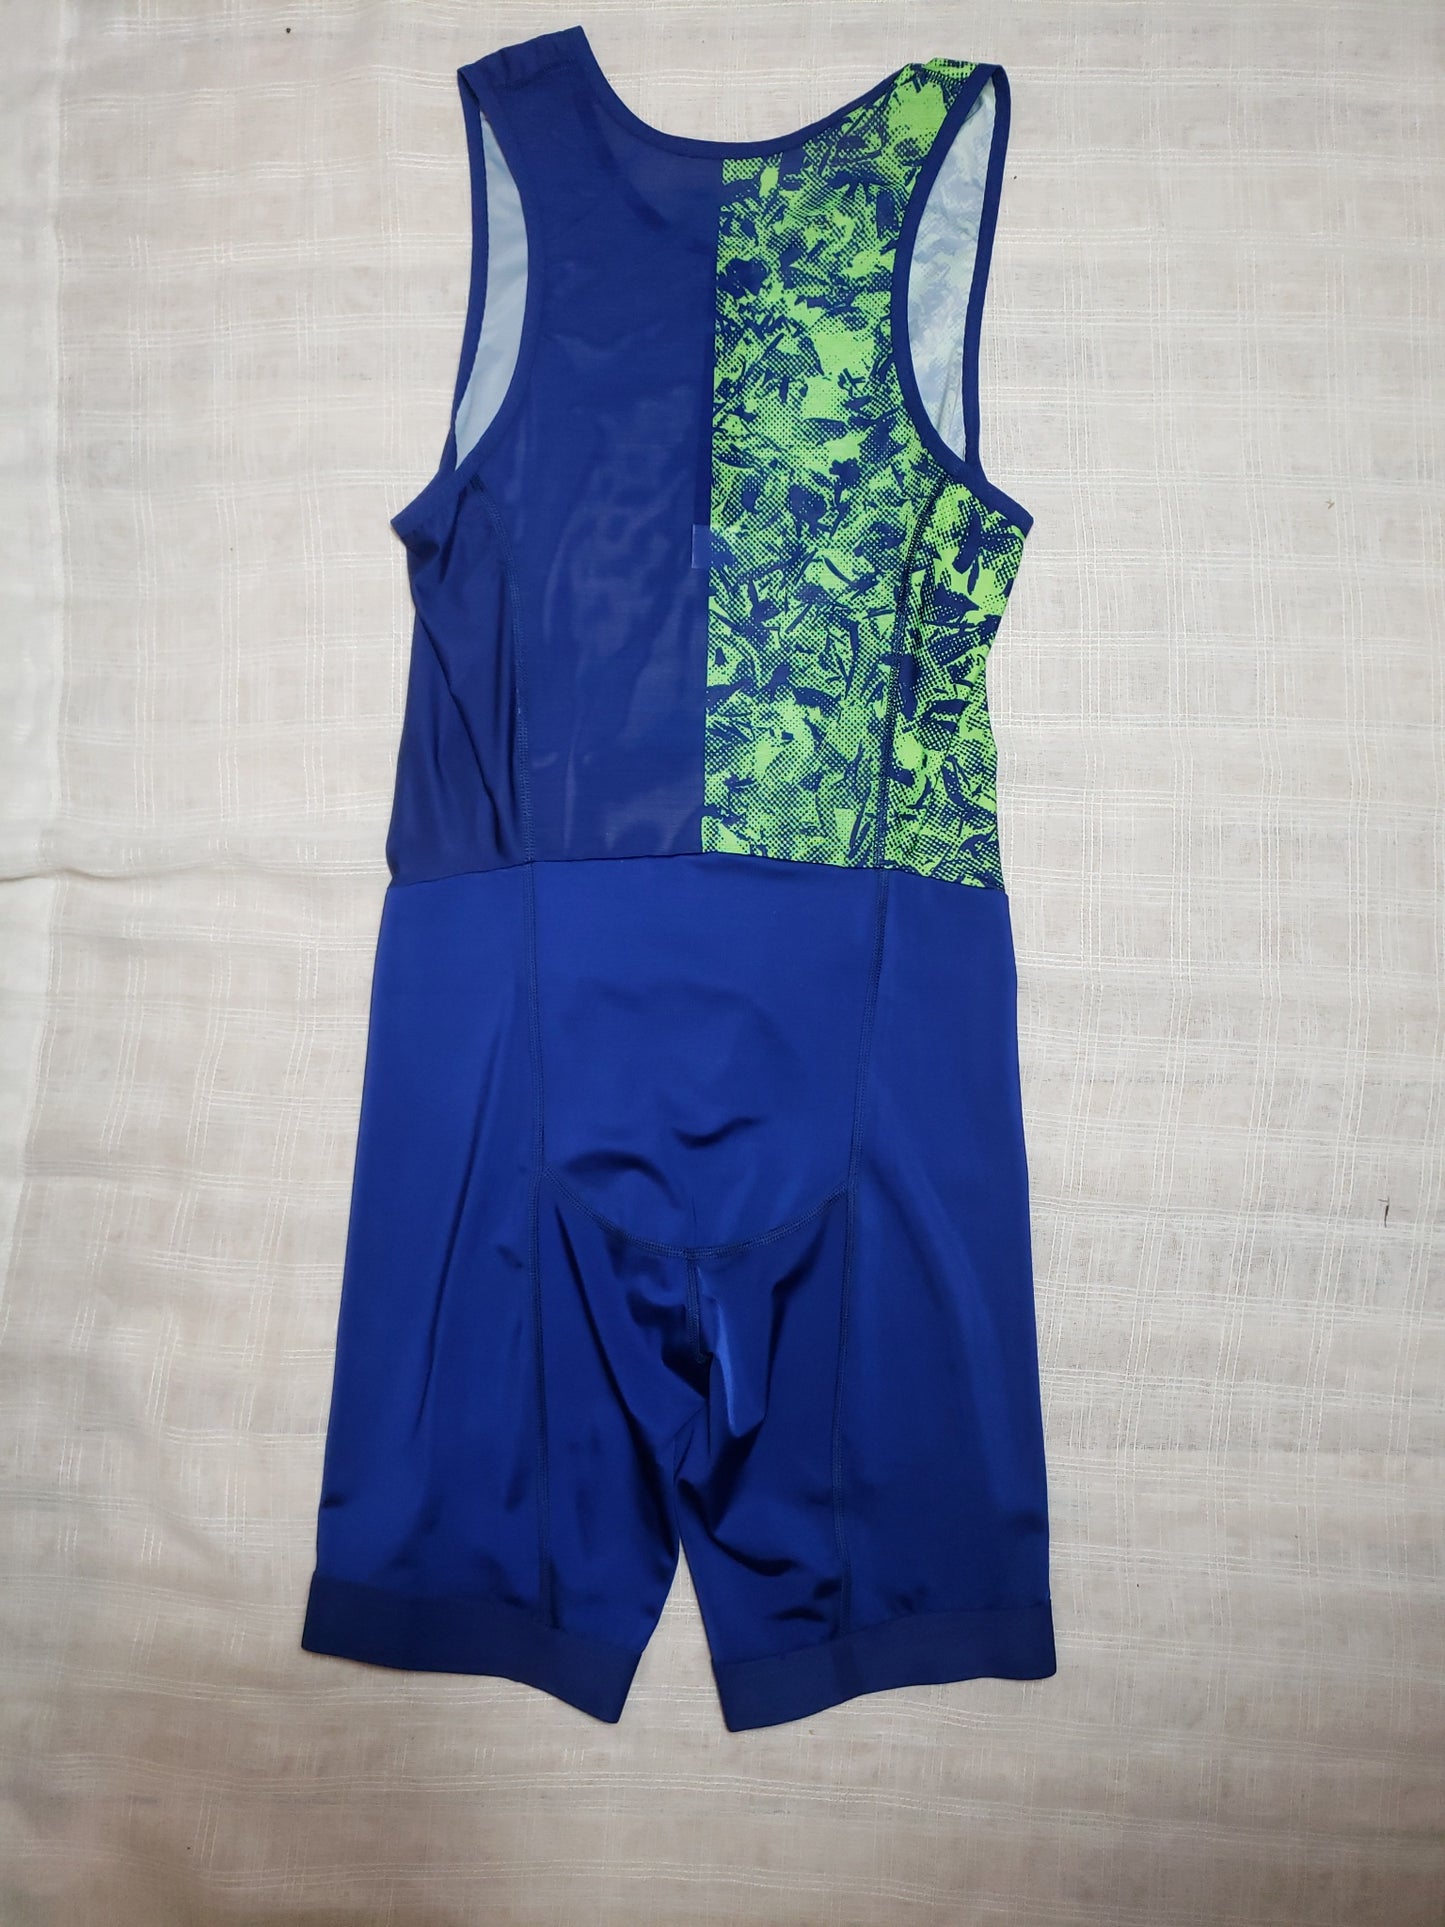 Nike pro elite 2019 Speedsuit Size Large Track and Field